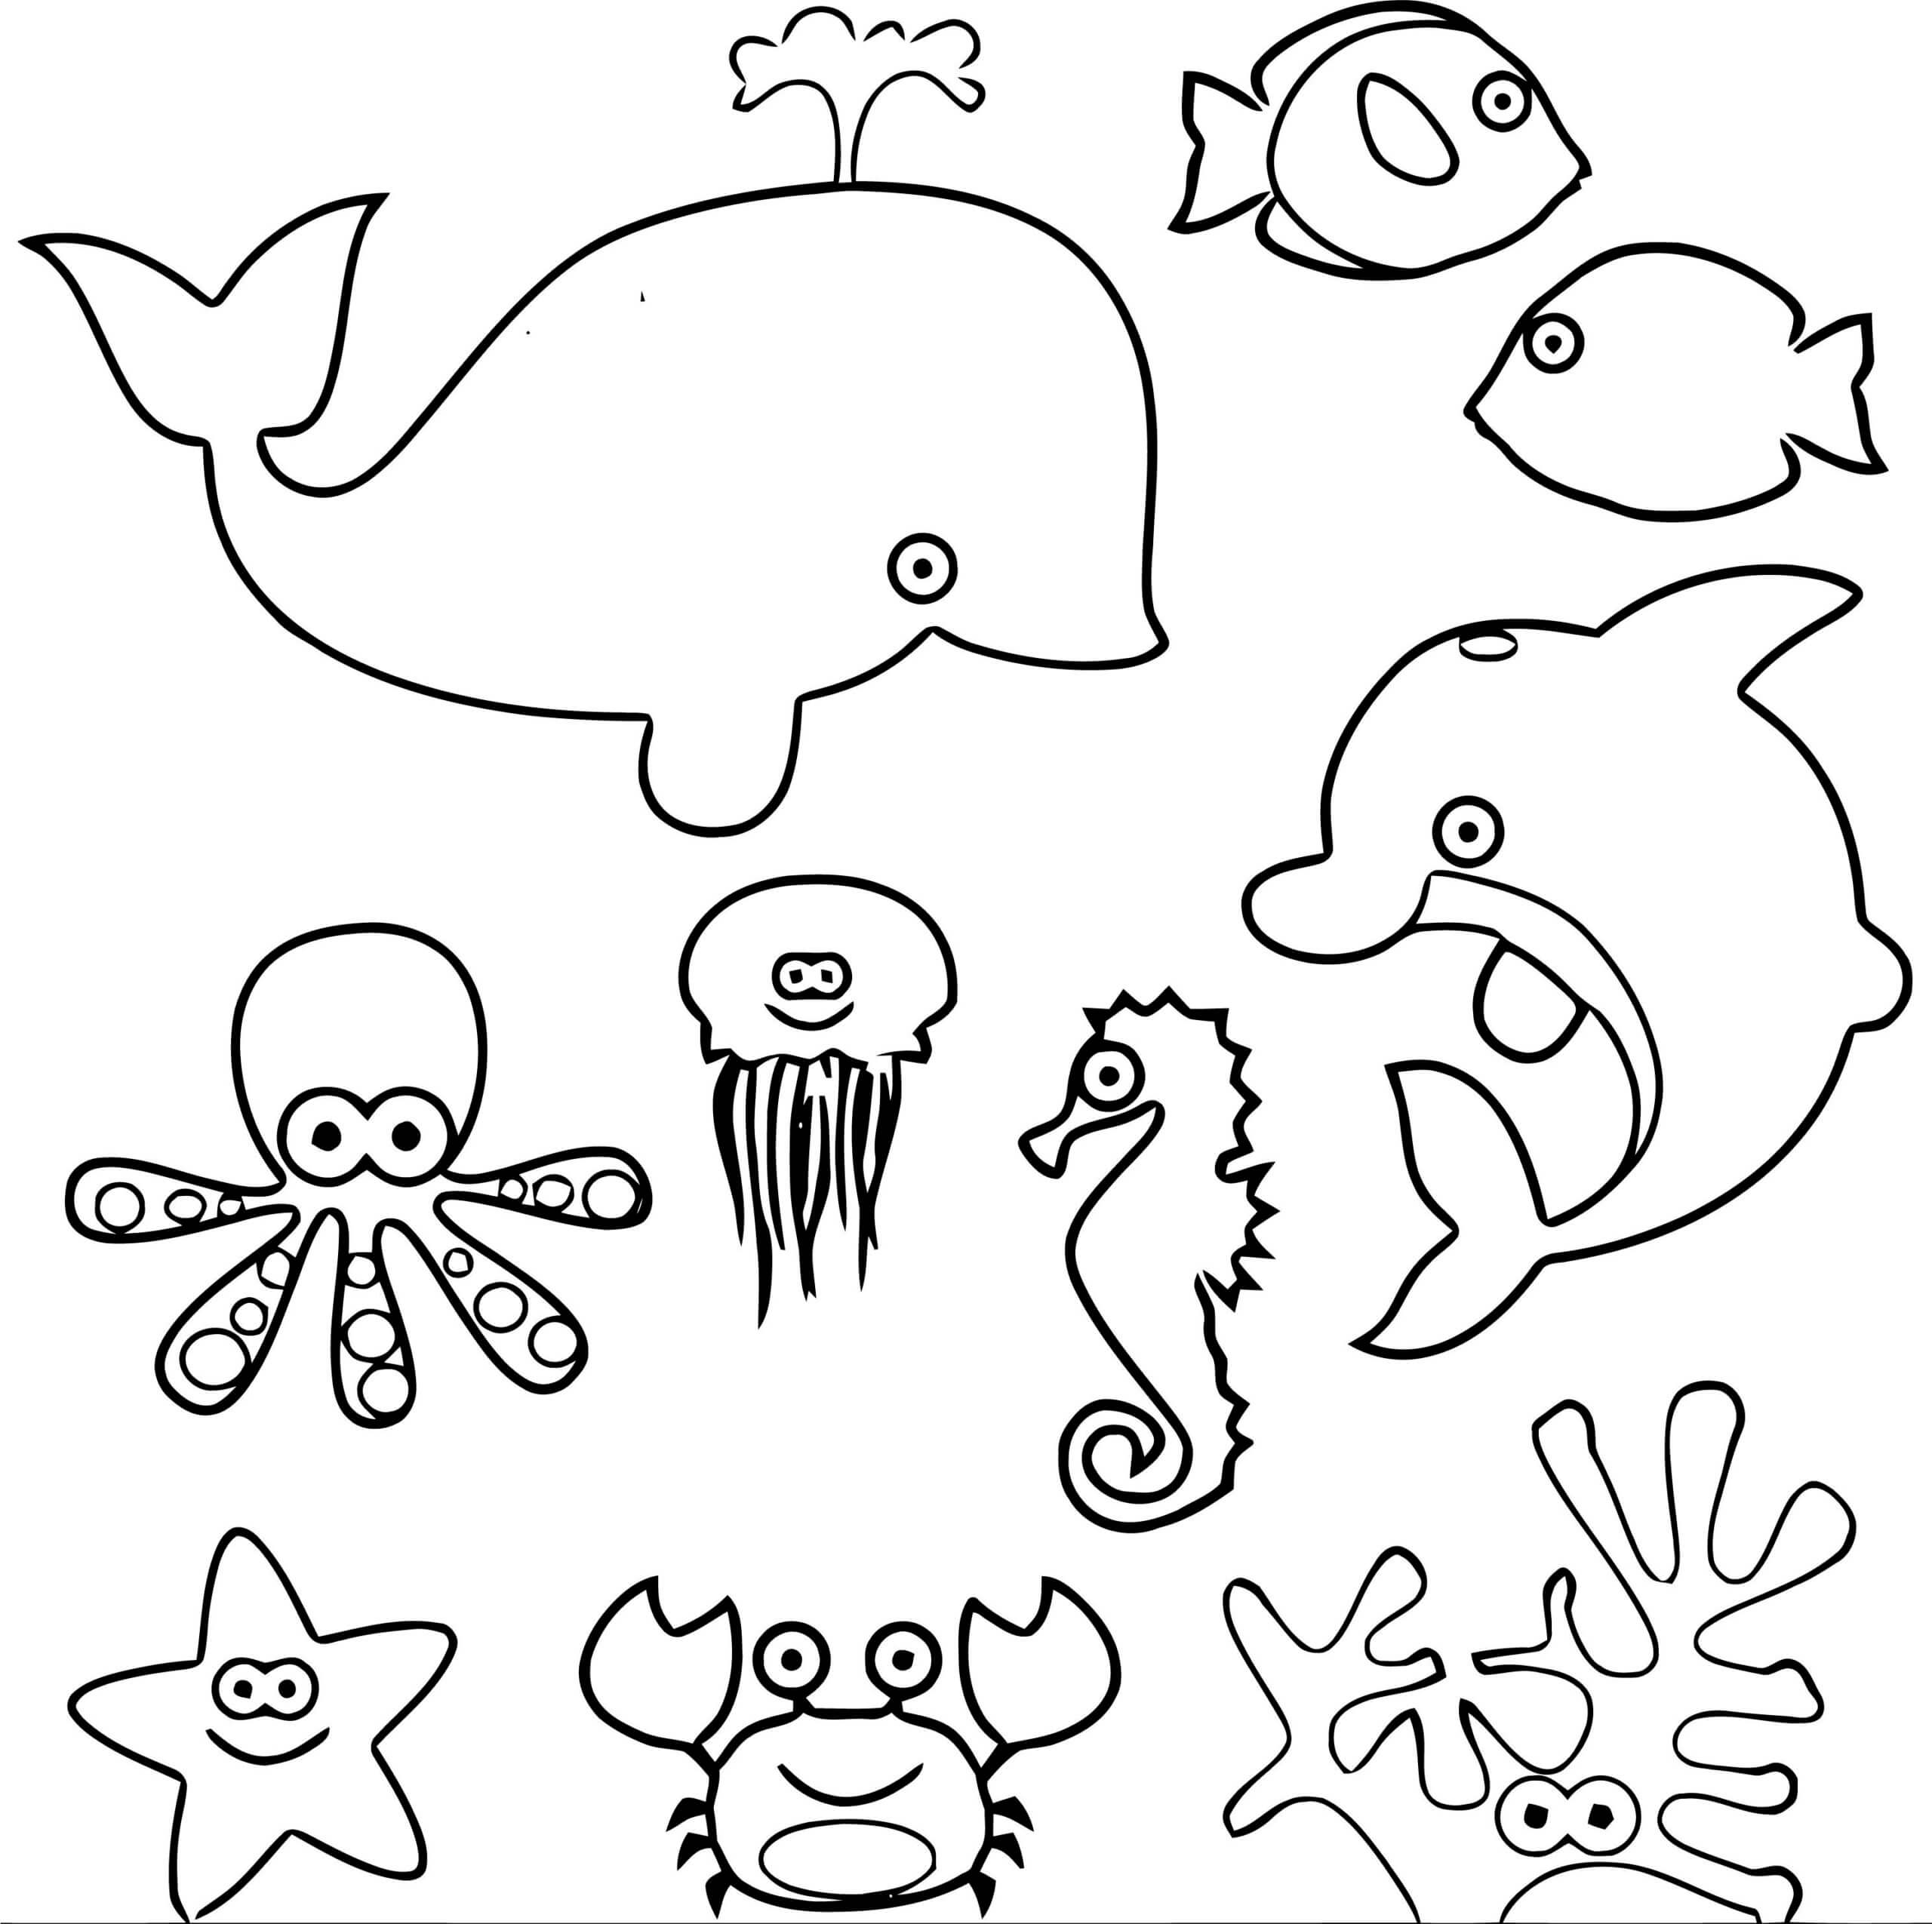 Draw & Color  Sea Creature Animal To Learn Kids - Download free Sea Animal Coloring Pages for kids.